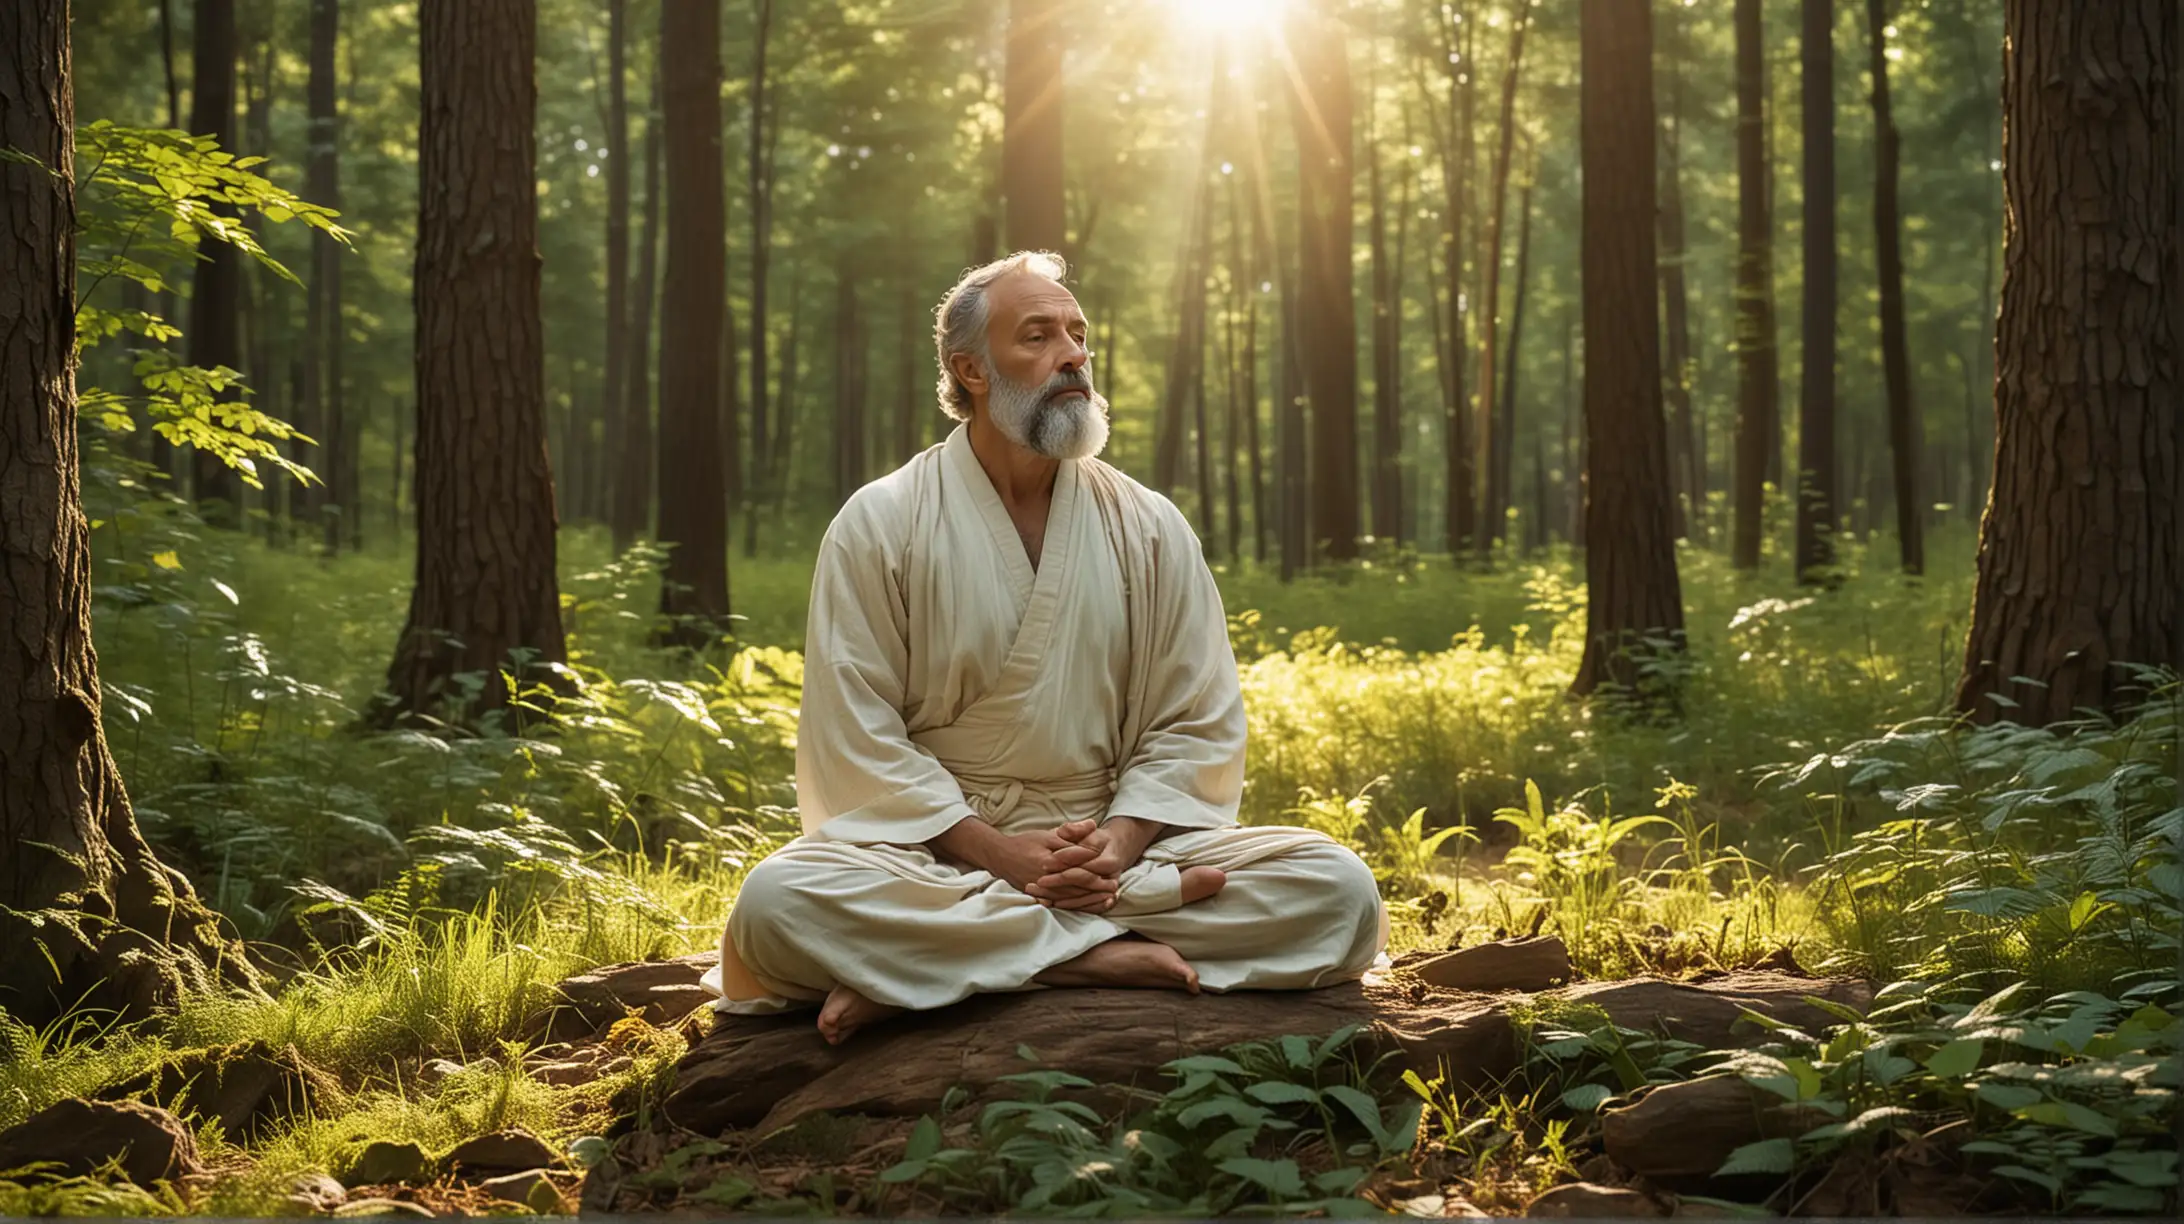 Visualize a Stoic philosopher meditating in a tranquil forest, finding peace and harmony amidst the natural surroundings.
Description: The image depicts a Stoic philosopher sitting cross-legged on the forest floor, surrounded by towering trees and dappled sunlight filtering through the foliage. With eyes closed and a serene expression, the philosopher engages in deep meditation, connecting with the rhythms of nature and finding inner tranquility